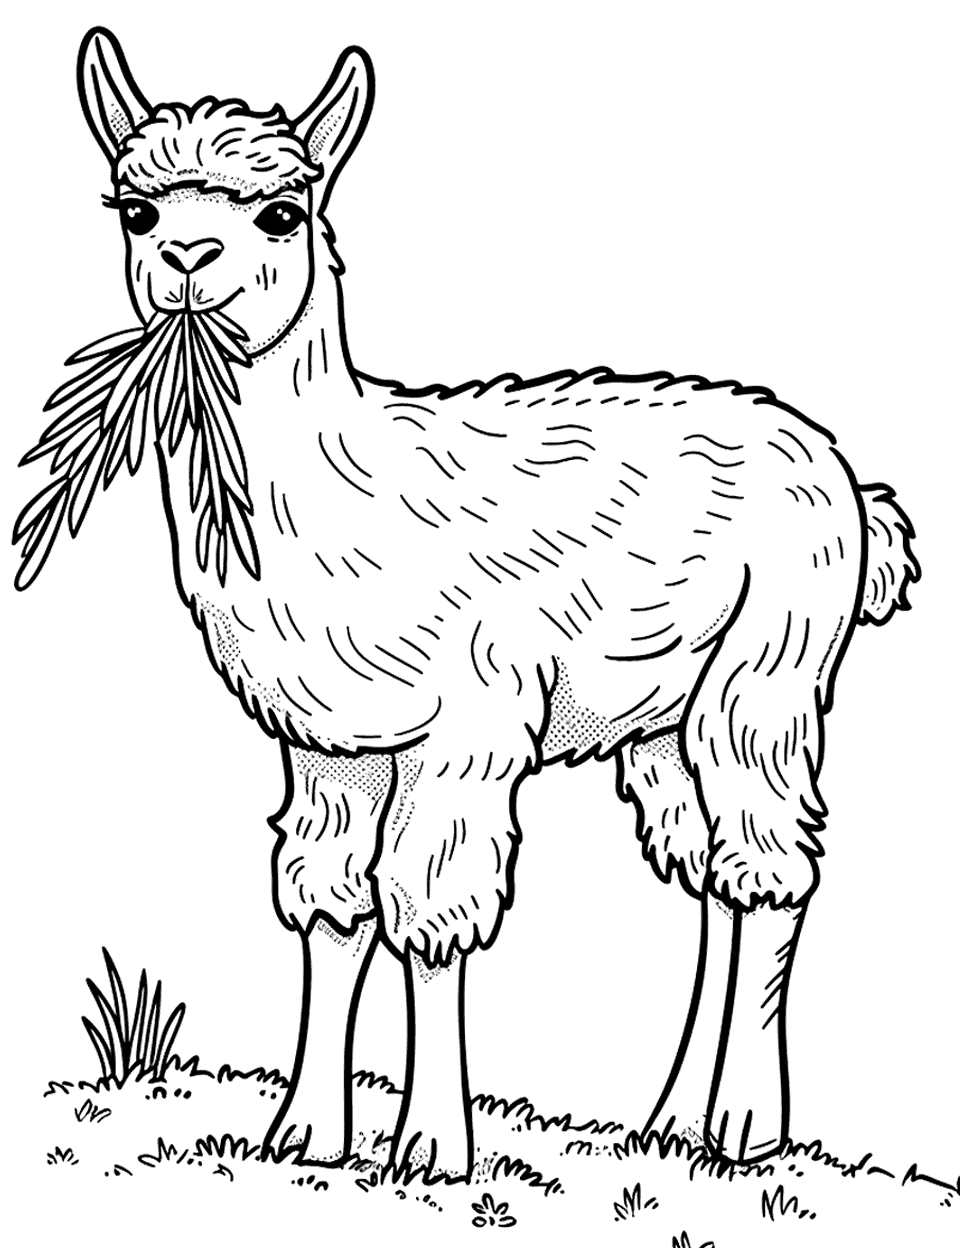 Alpaca Chewing Grass Farm Animal Coloring Page - An alpaca standing still, chewing on a mouthful of fresh grass.